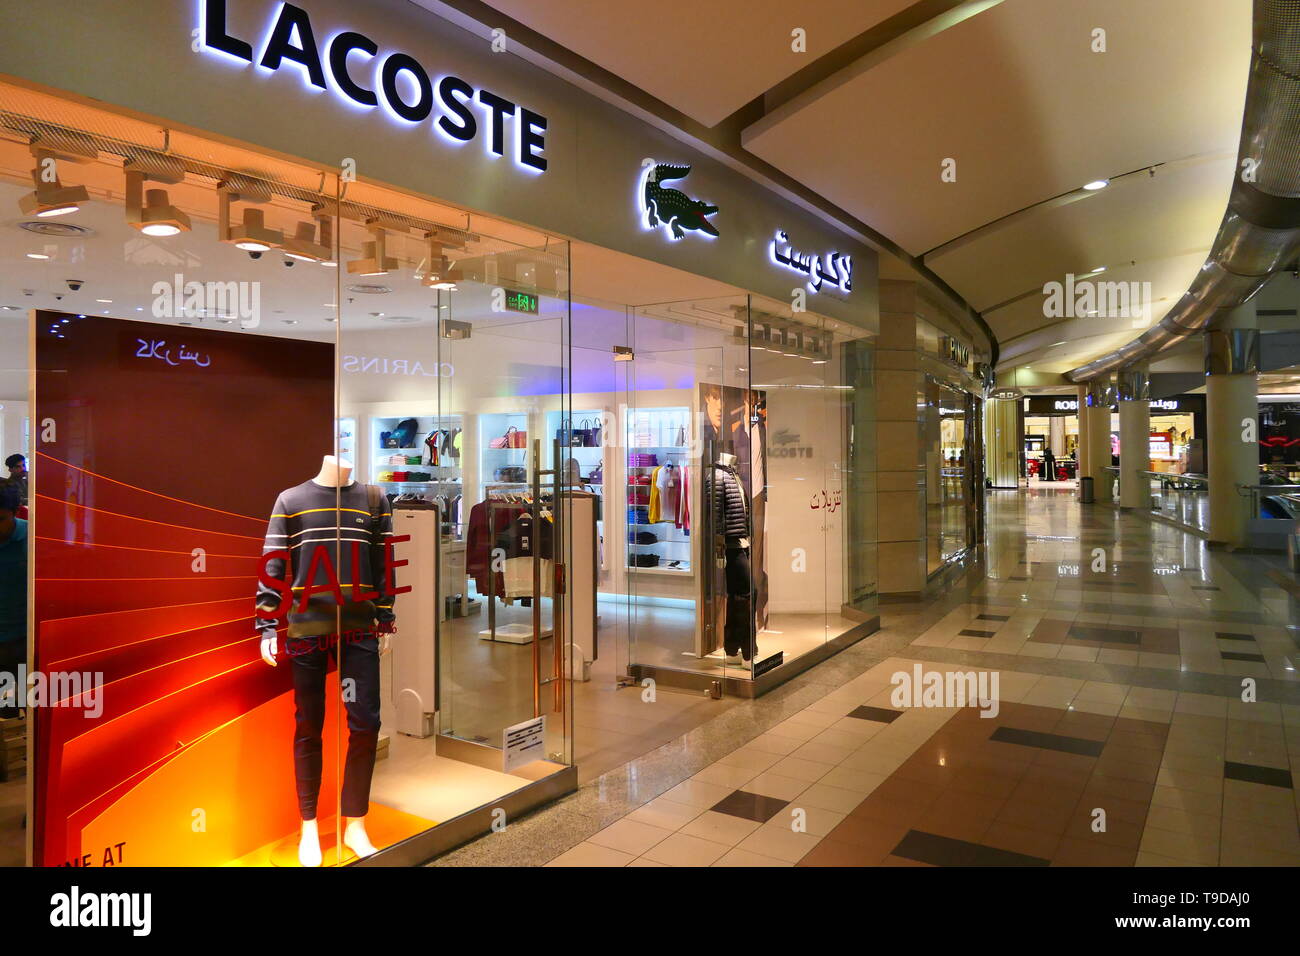 lacoste mall